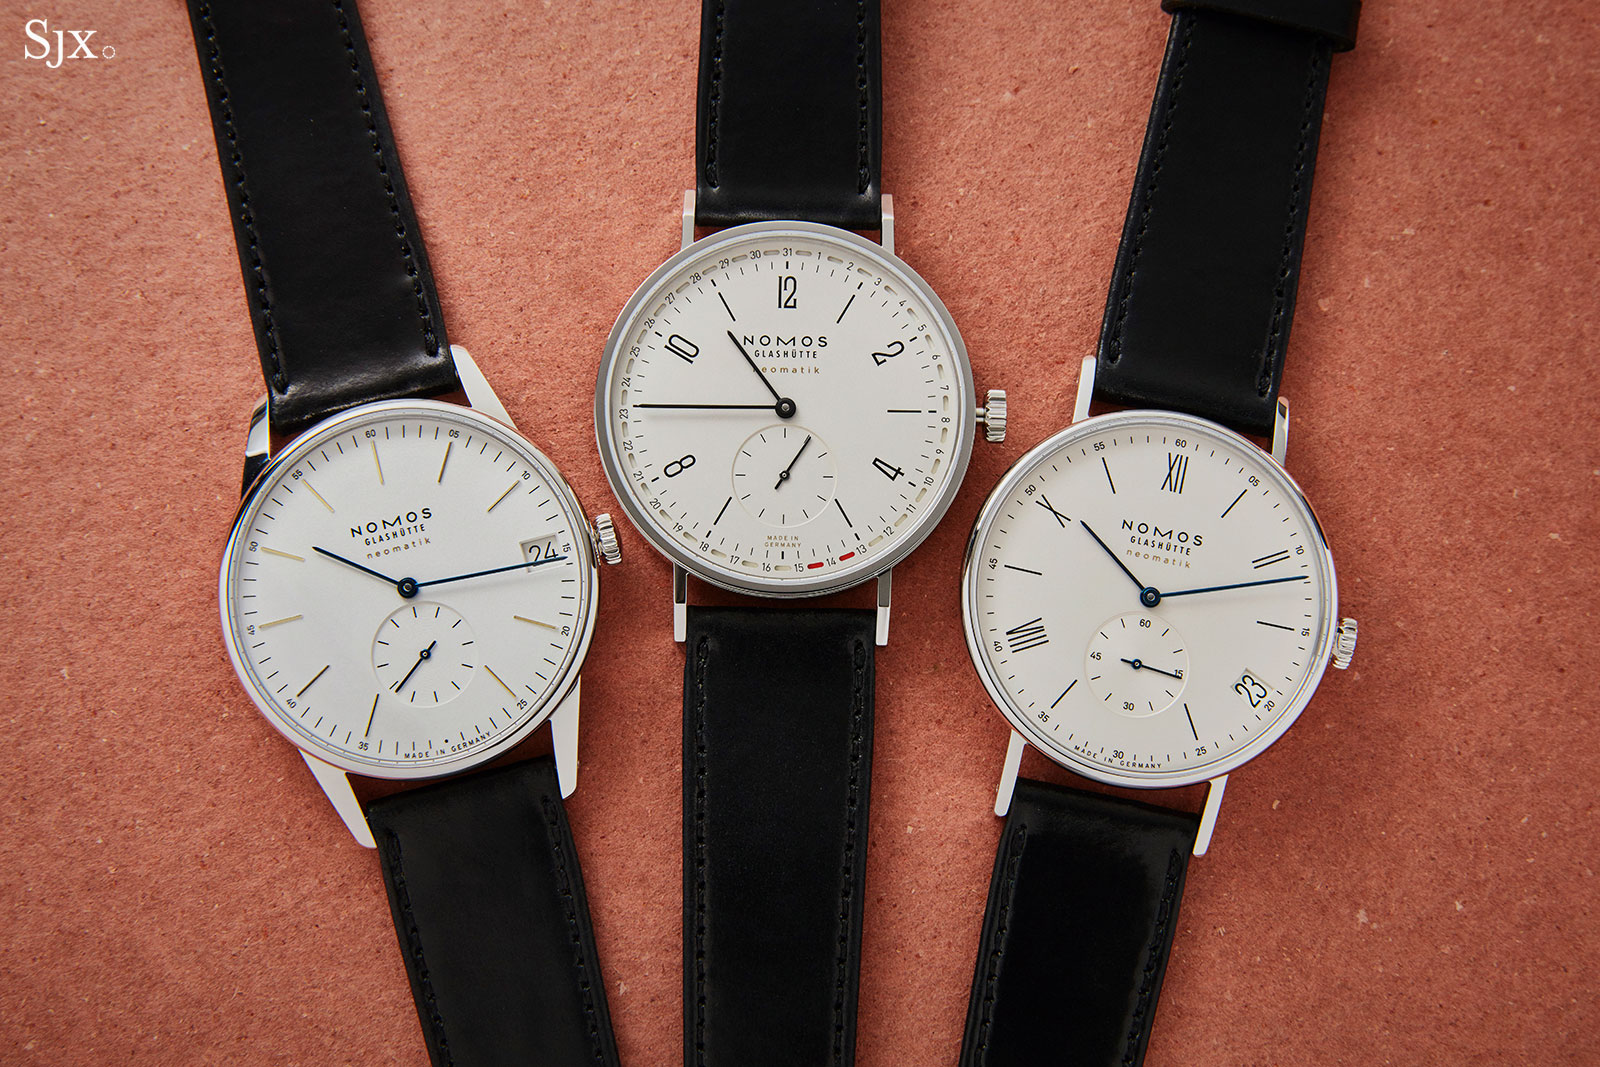 Hands-On with the Nomos Neomatik Update | SJX Watches